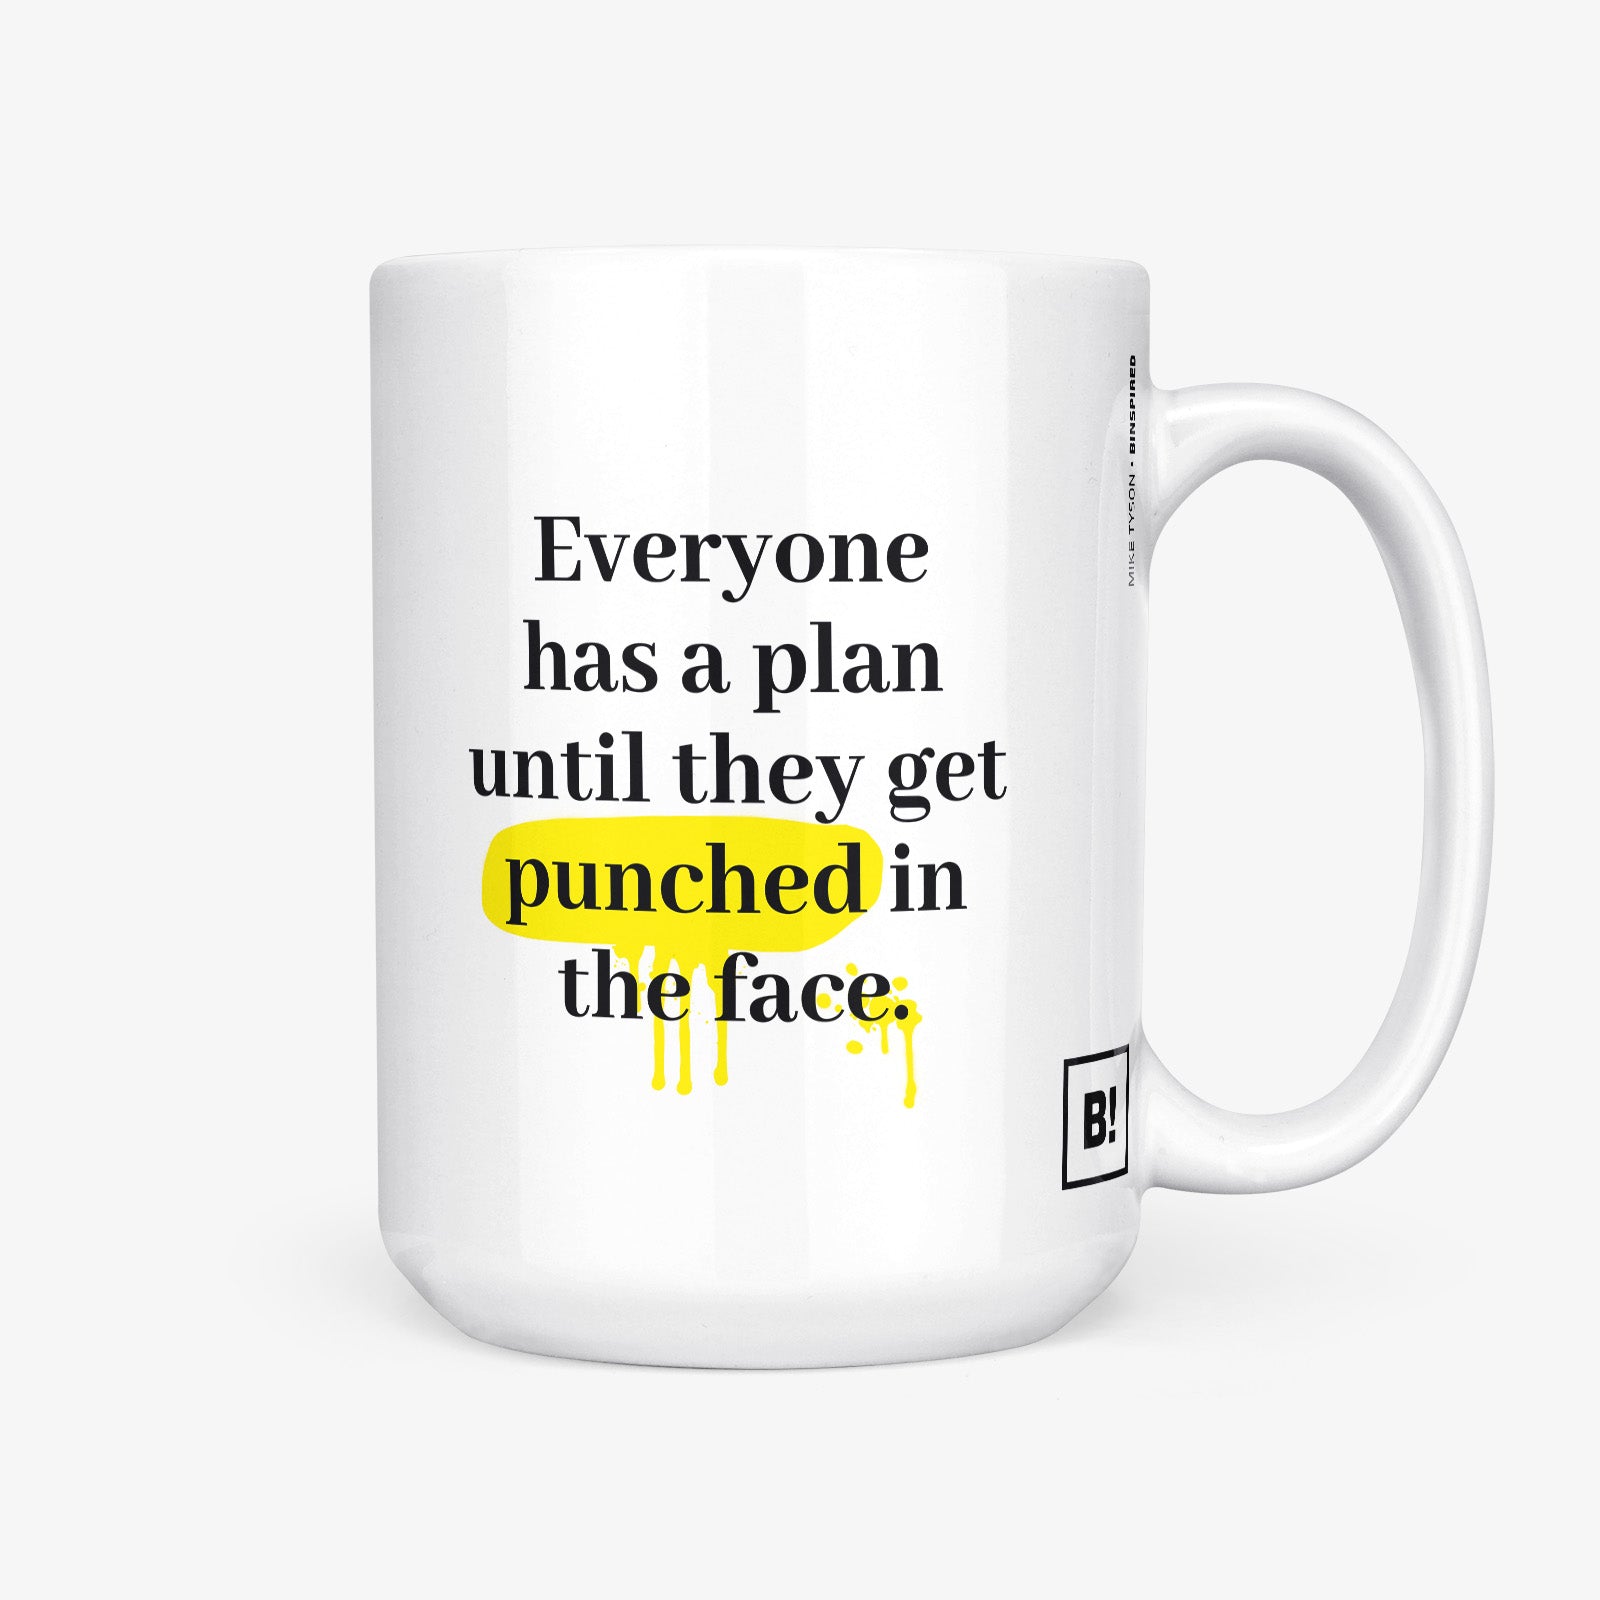 Be inspired by Mike Tyson's famous quote, "Everyone has a plan until they get punched in the face" on this white and glossy 15oz coffee mug with the handle on the right.